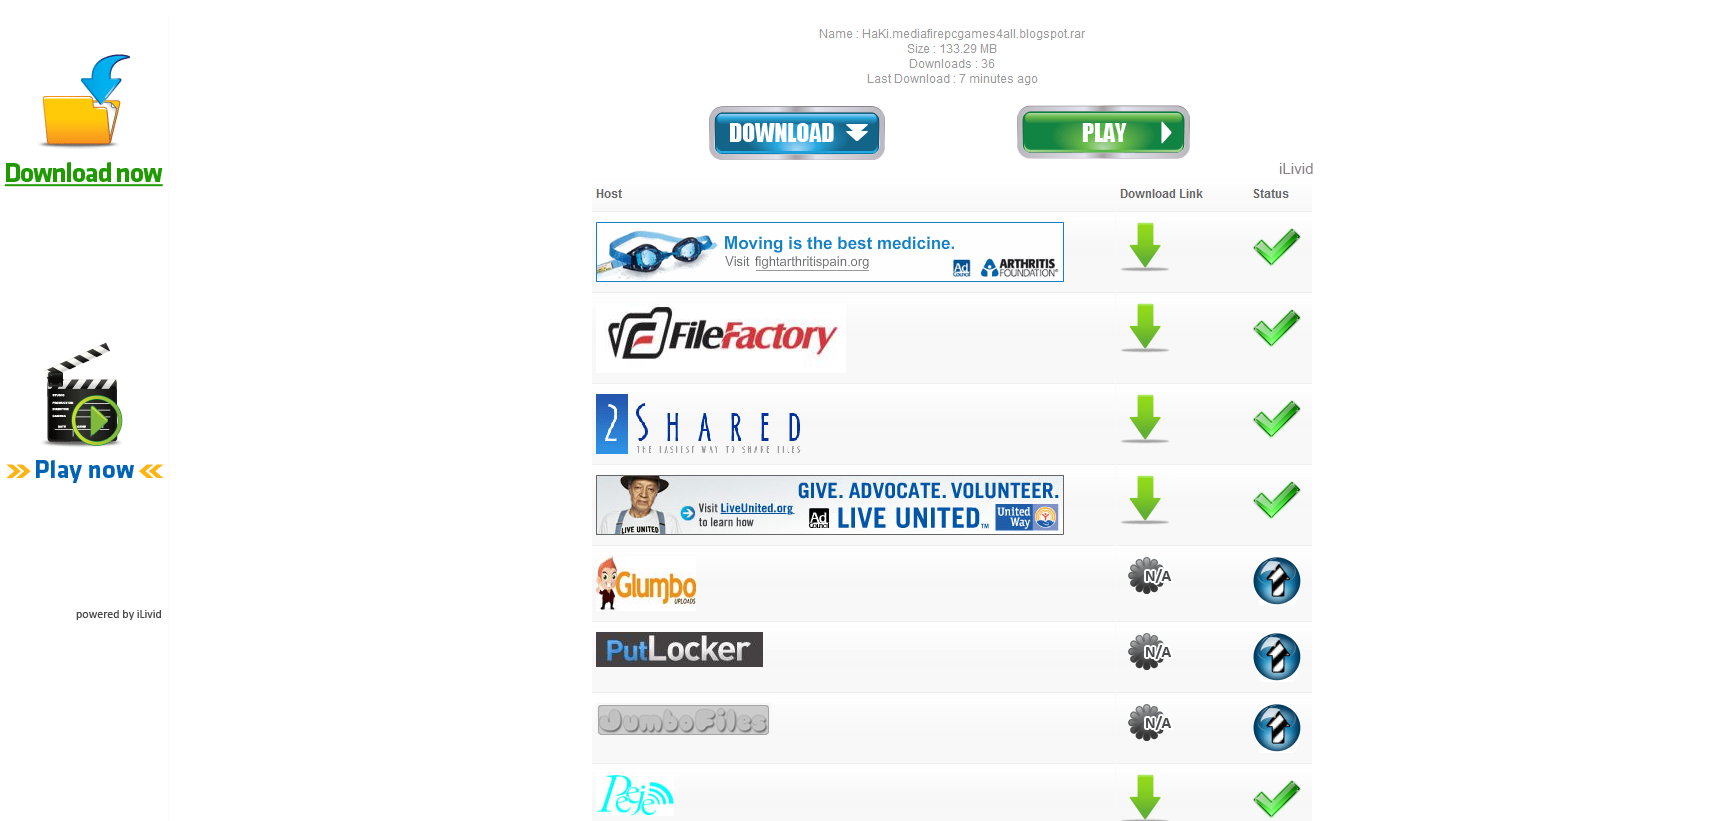 How To Identify Fake Download Buttons(Ads) At File Sharing Sites